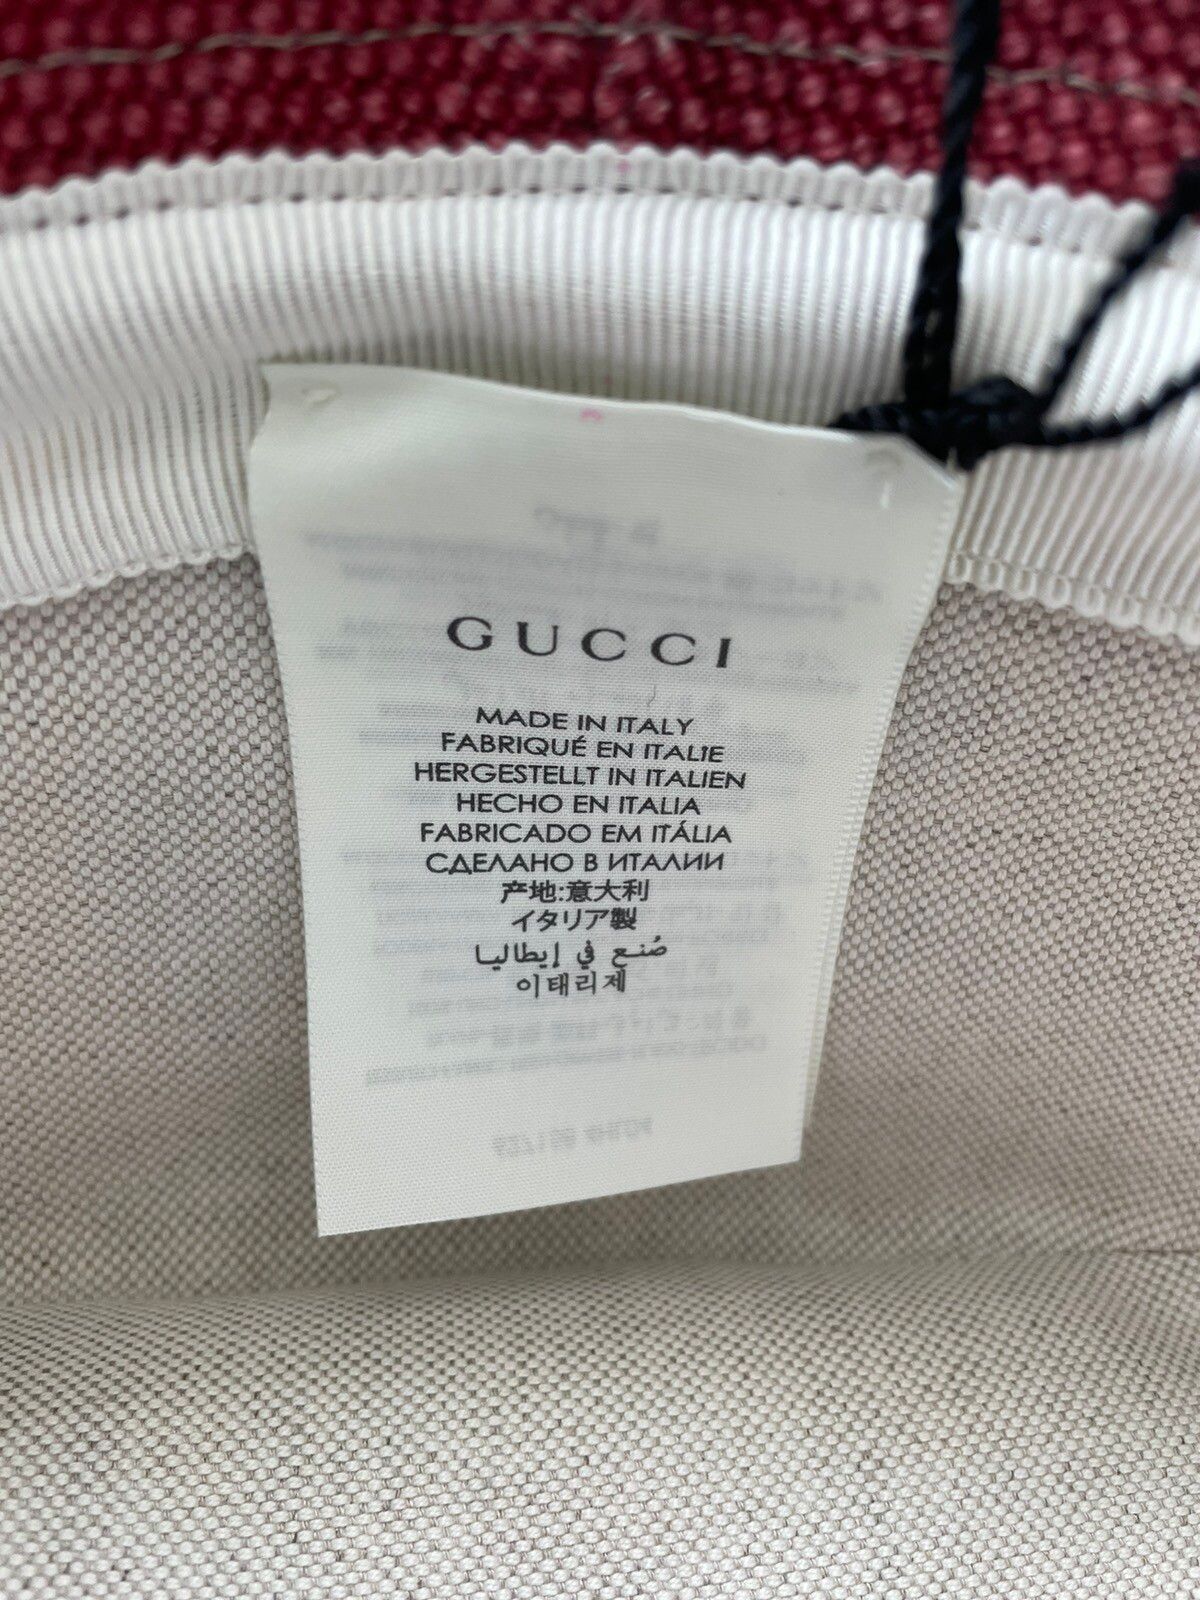 Gucci Brand New Super Runway Limited Edition Rare Gucci Logo Hat Size ONE SIZE - 5 Thumbnail